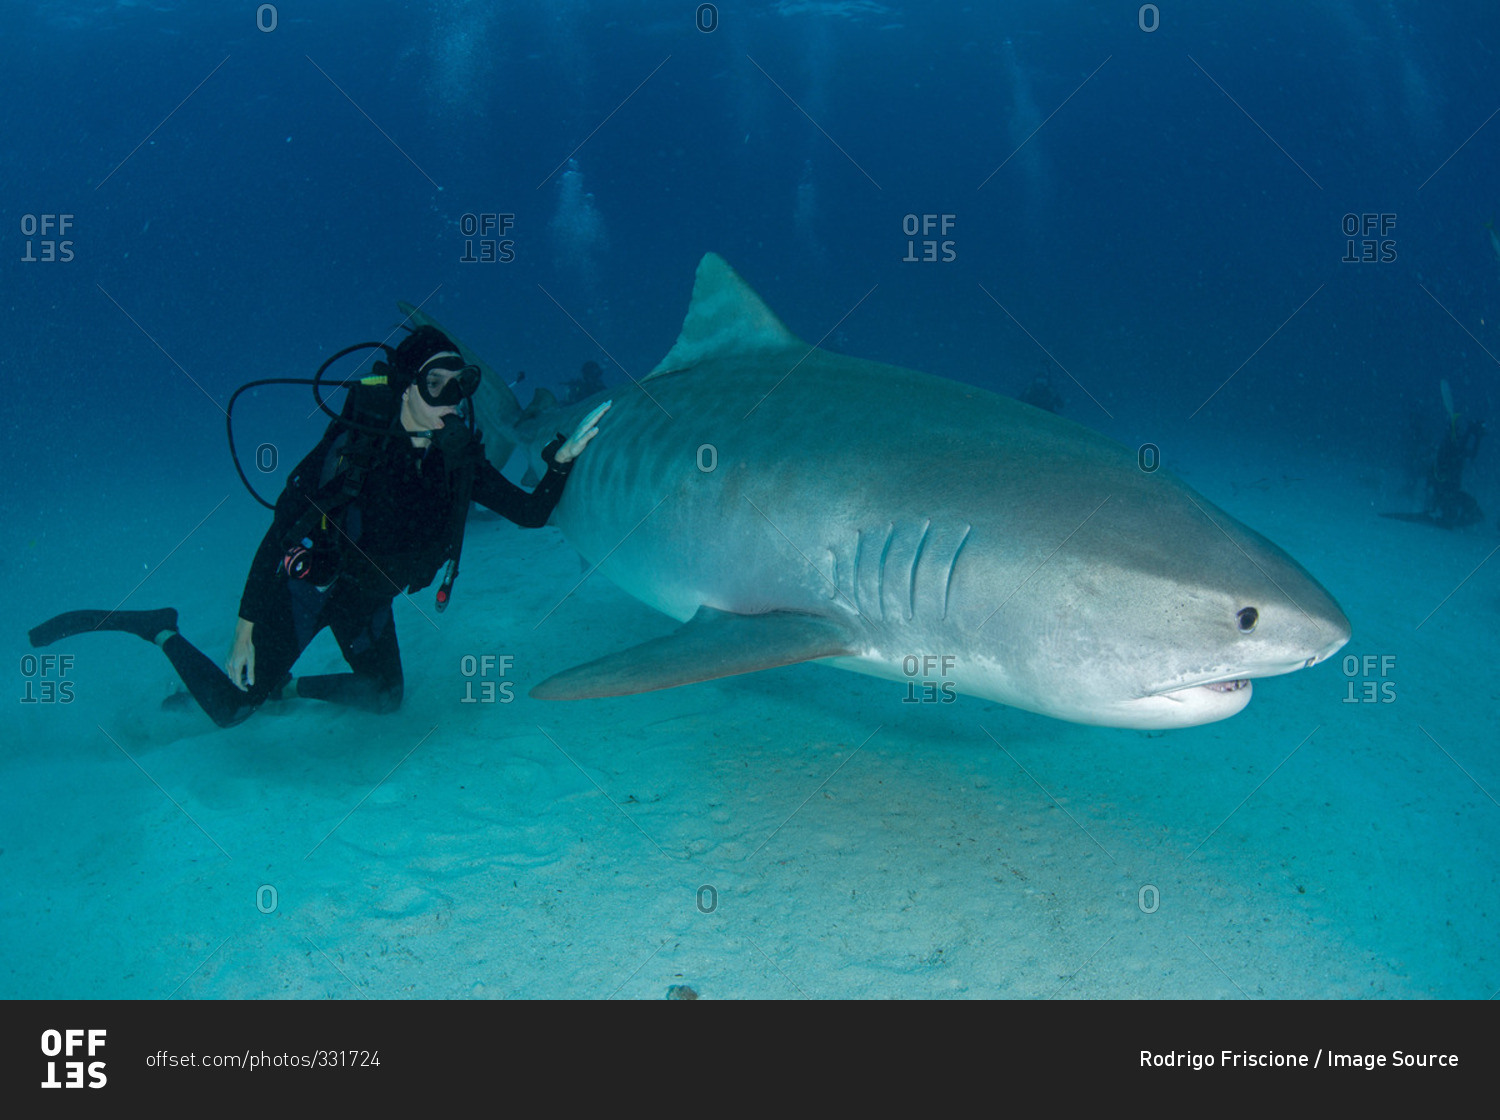 Underwater view of scuba diver touching tiger shark near seabed, Tiger Beach, Bahamas